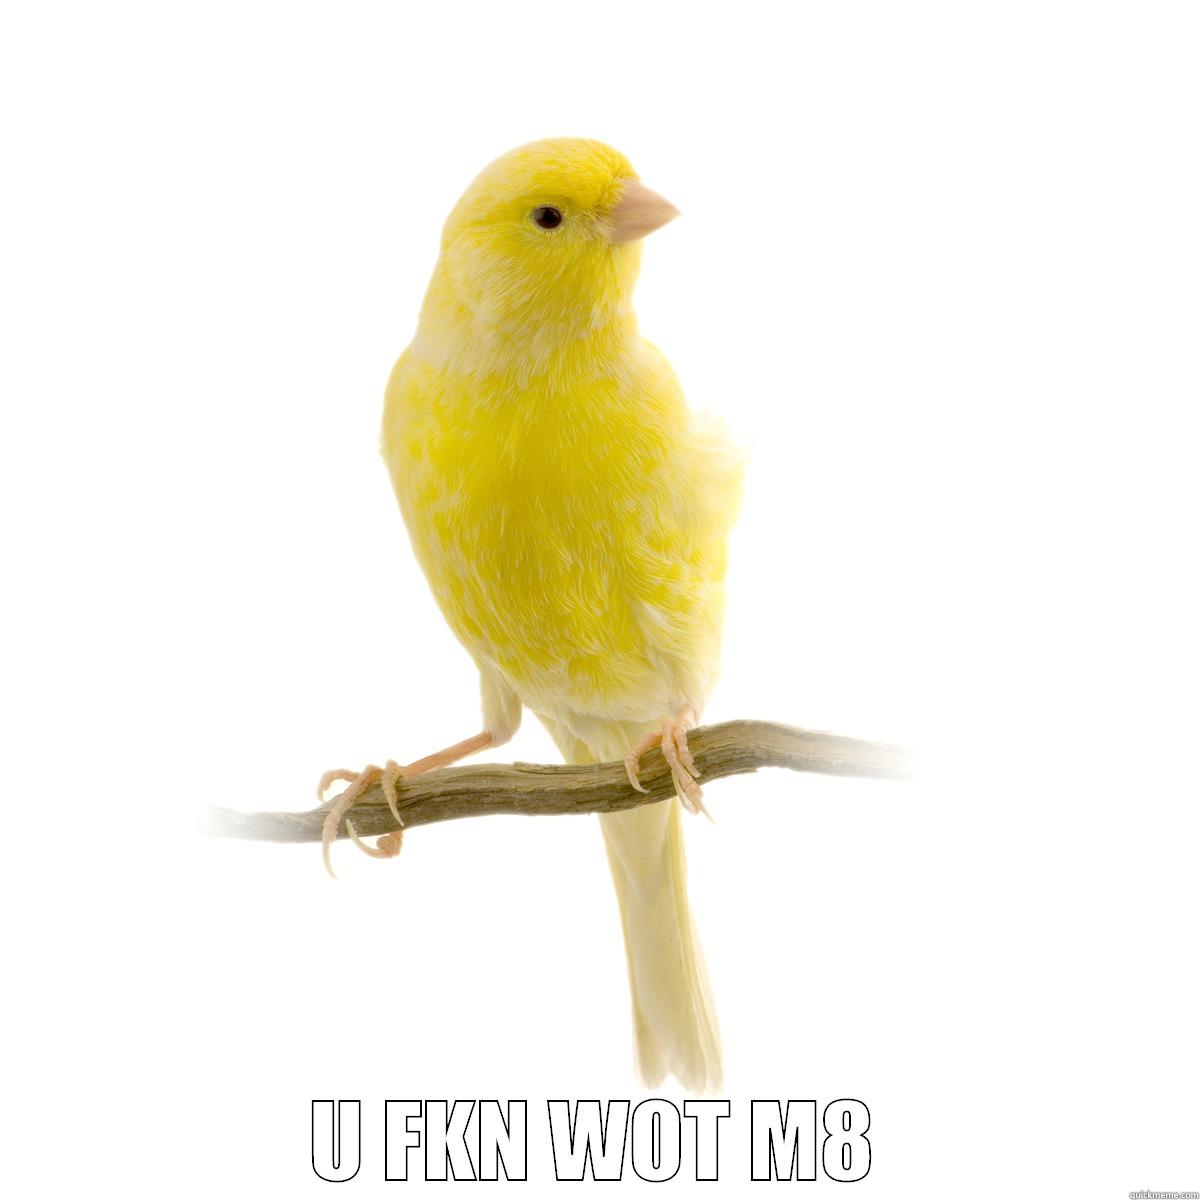 canary is med  -  U FKN WOT M8 Misc